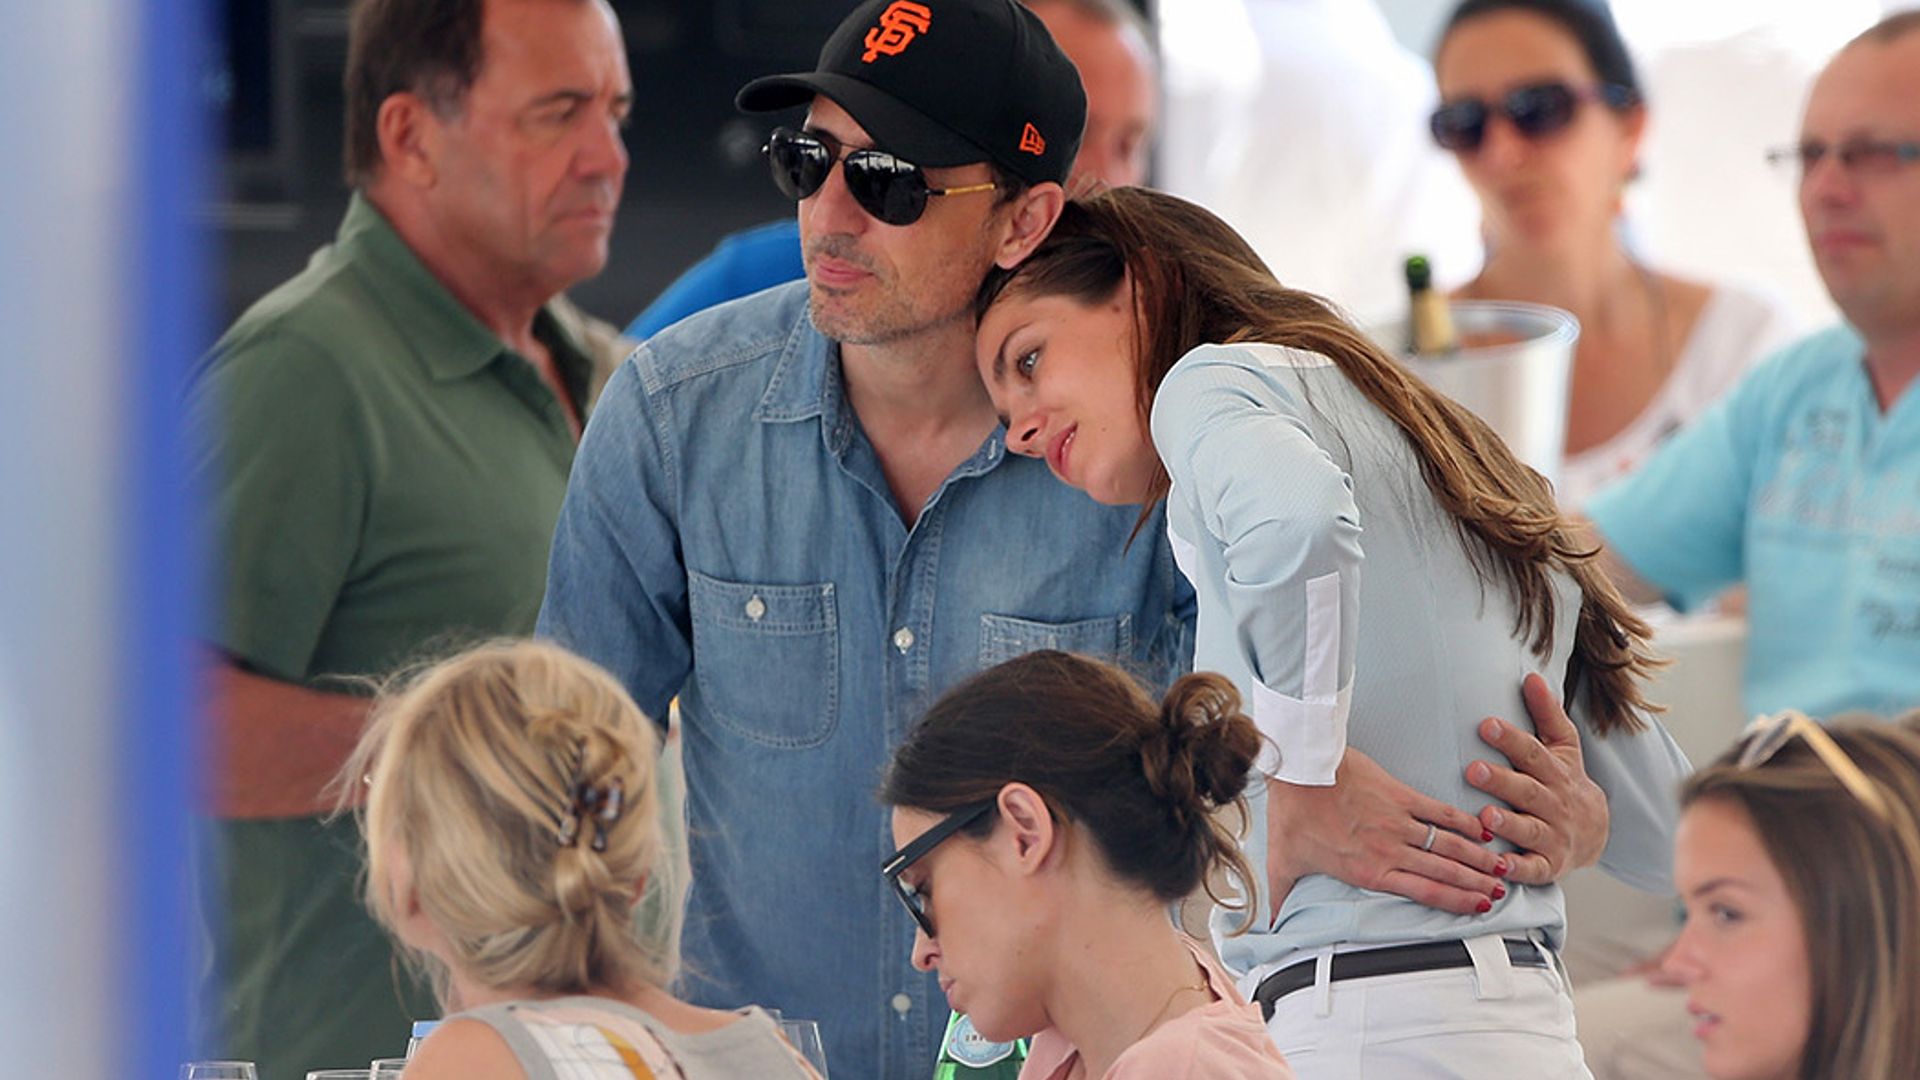 Charlotte Casiraghi and Gad Elmaleh step out together at St. Tropez horse show